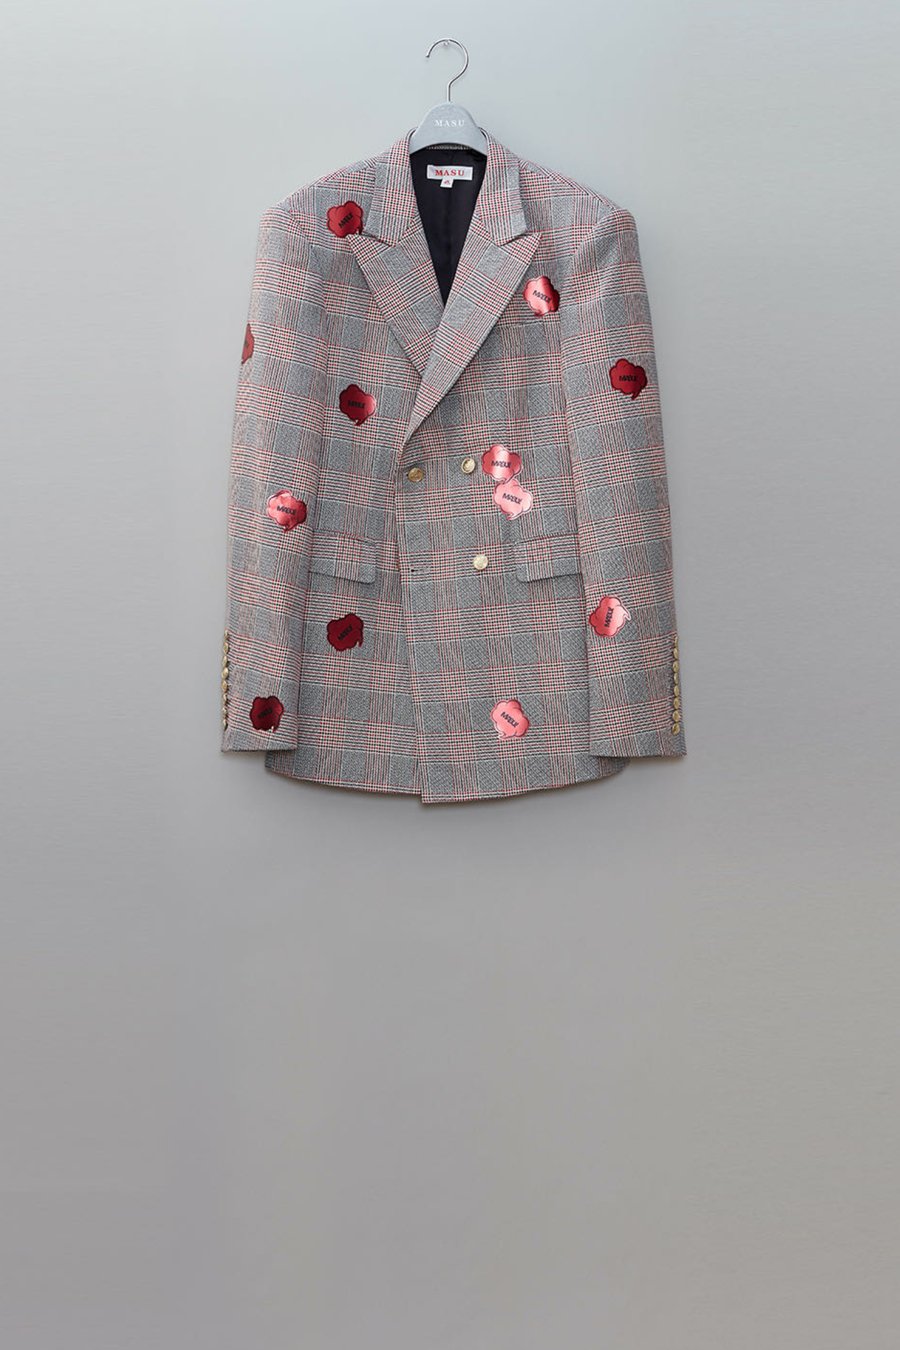 MASU  GLEN PLAID TAILORED JACKET(RED)<img class='new_mark_img2' src='https://img.shop-pro.jp/img/new/icons15.gif' style='border:none;display:inline;margin:0px;padding:0px;width:auto;' />